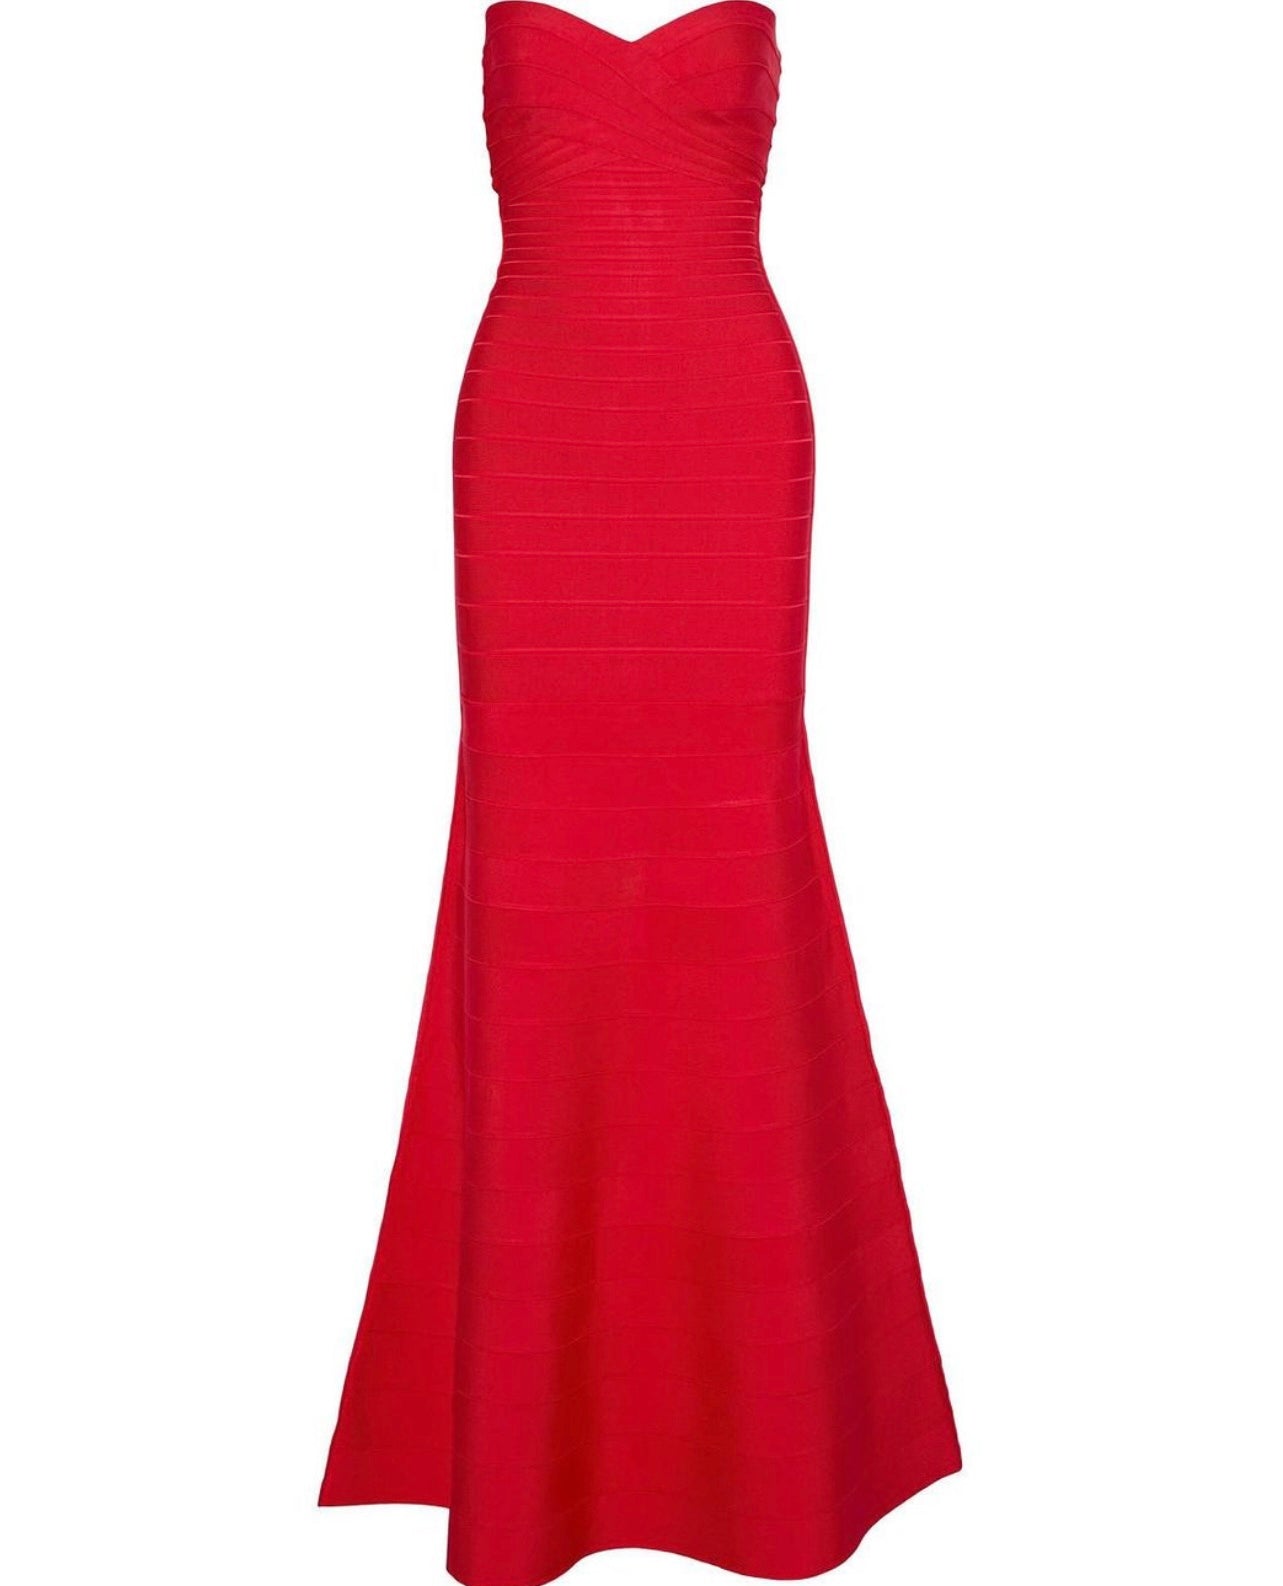 BRIGHT RED SARA GOWN